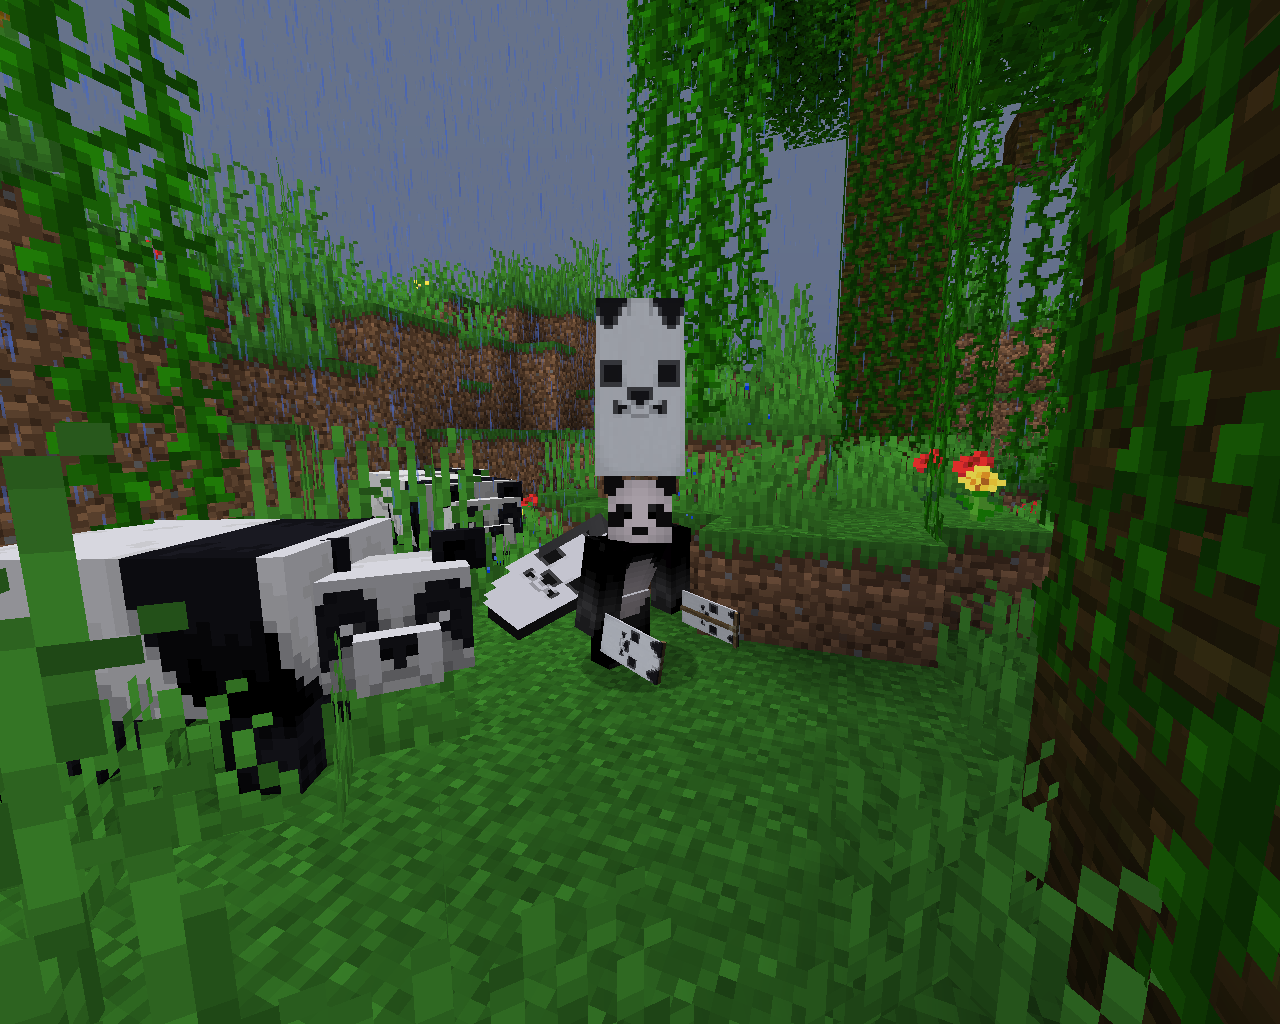 So in case, you didn't notice, I really like pandas